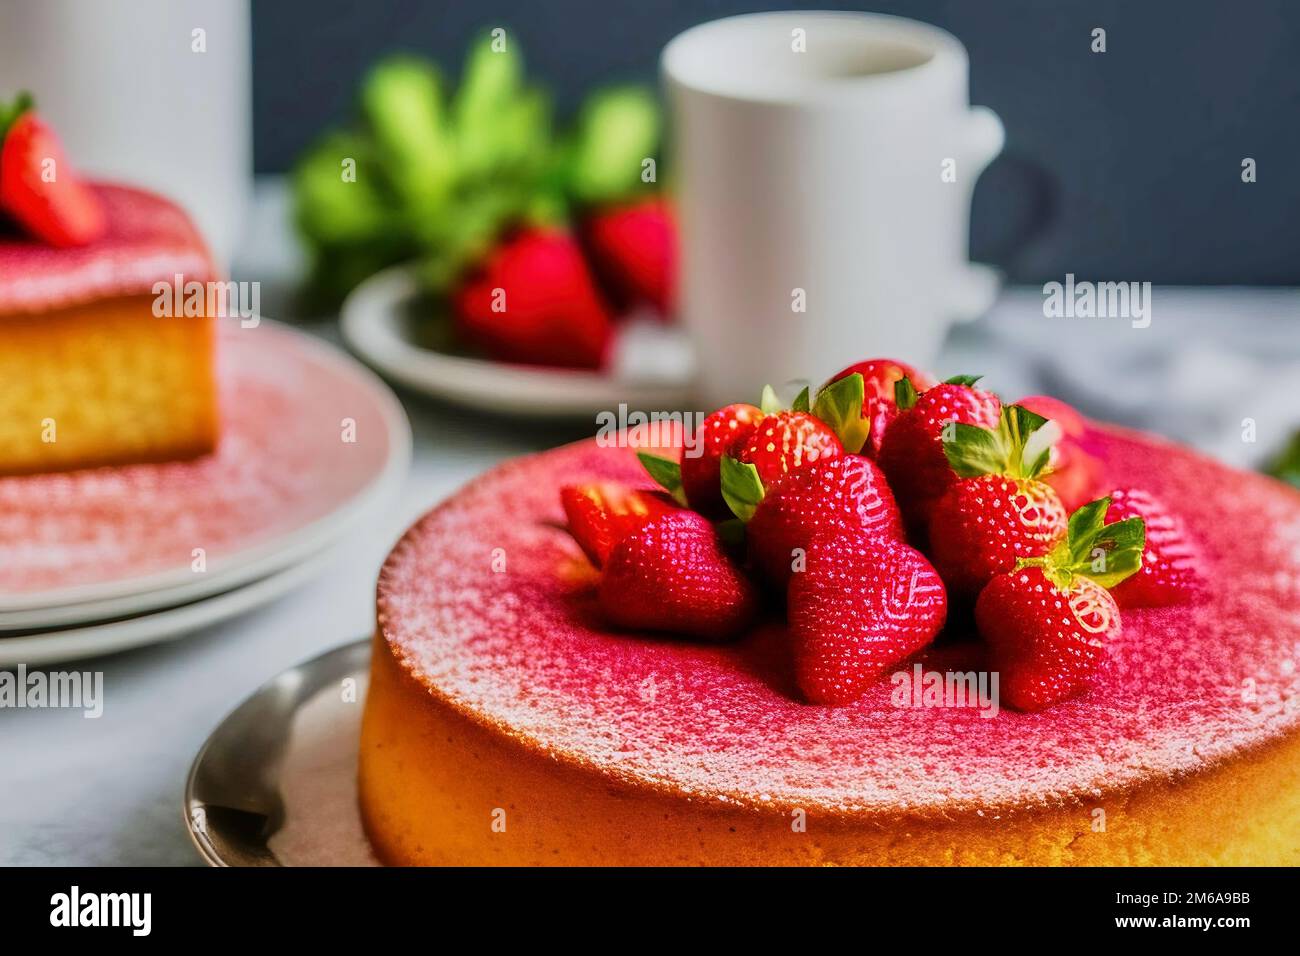 Small fluffy cake sprinkled with powdered sugar and decorated with whole strawberries with green leaves, made with generative AI. Stock Photo